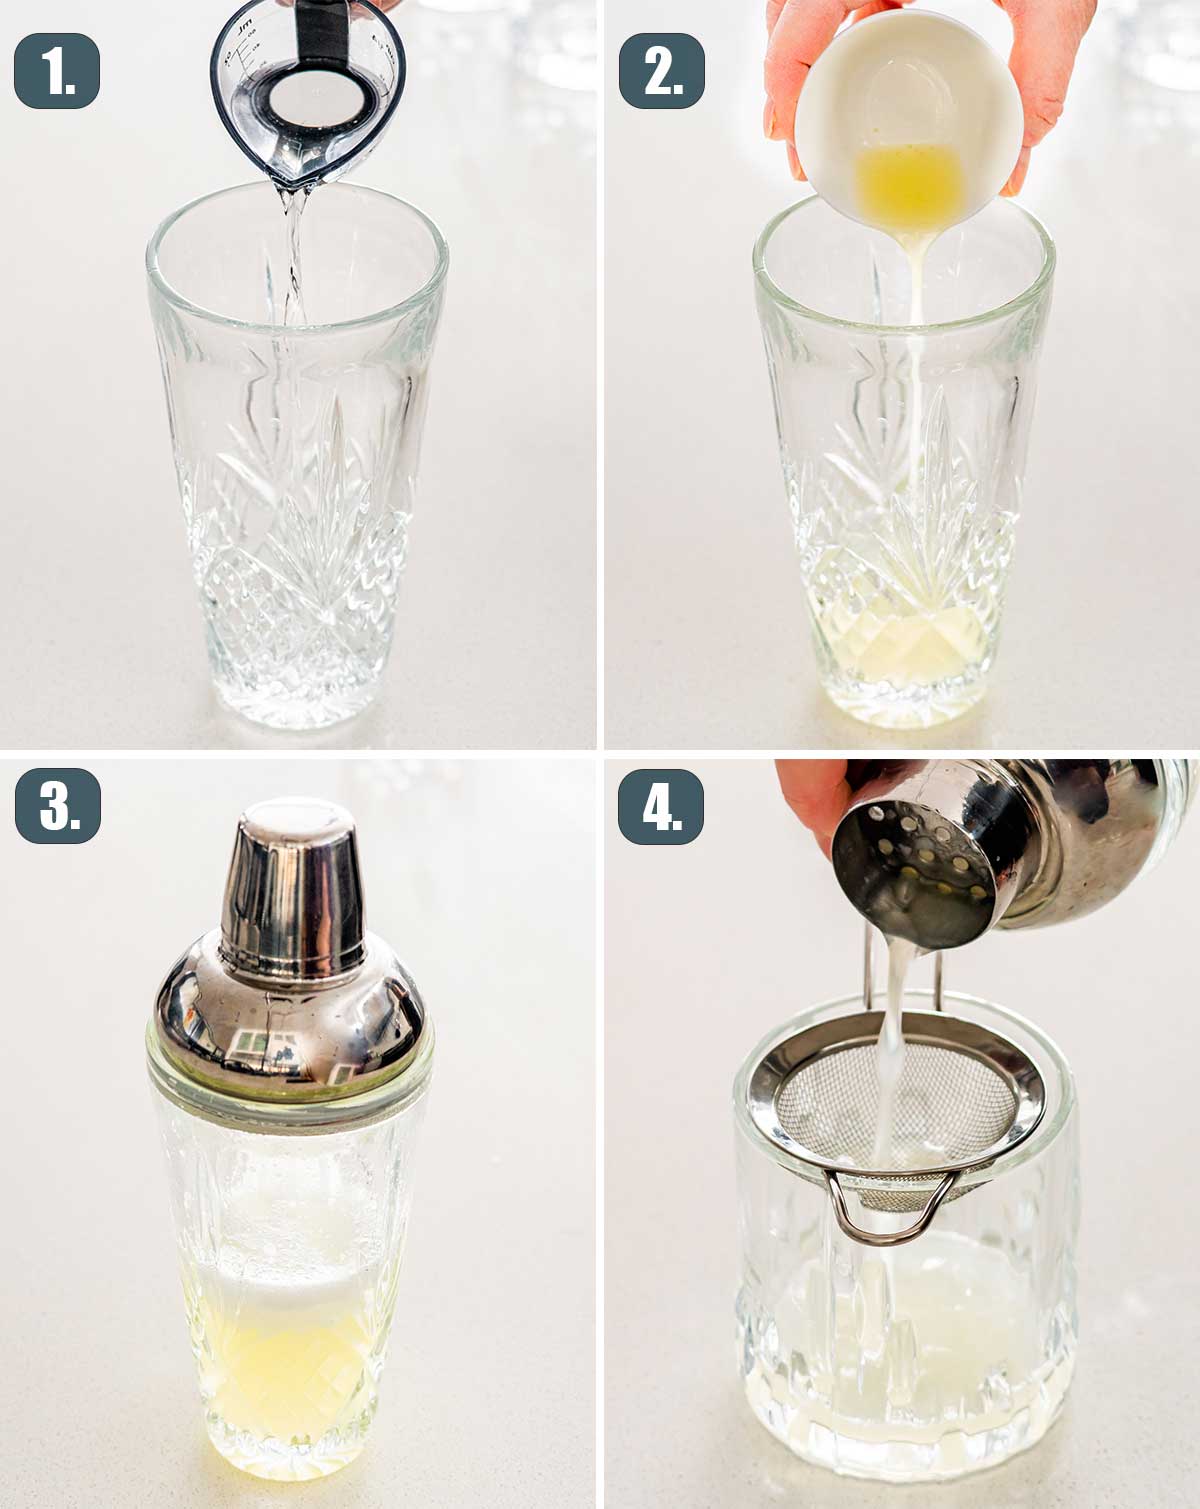 detailed process shots showing how to make gin fizz.